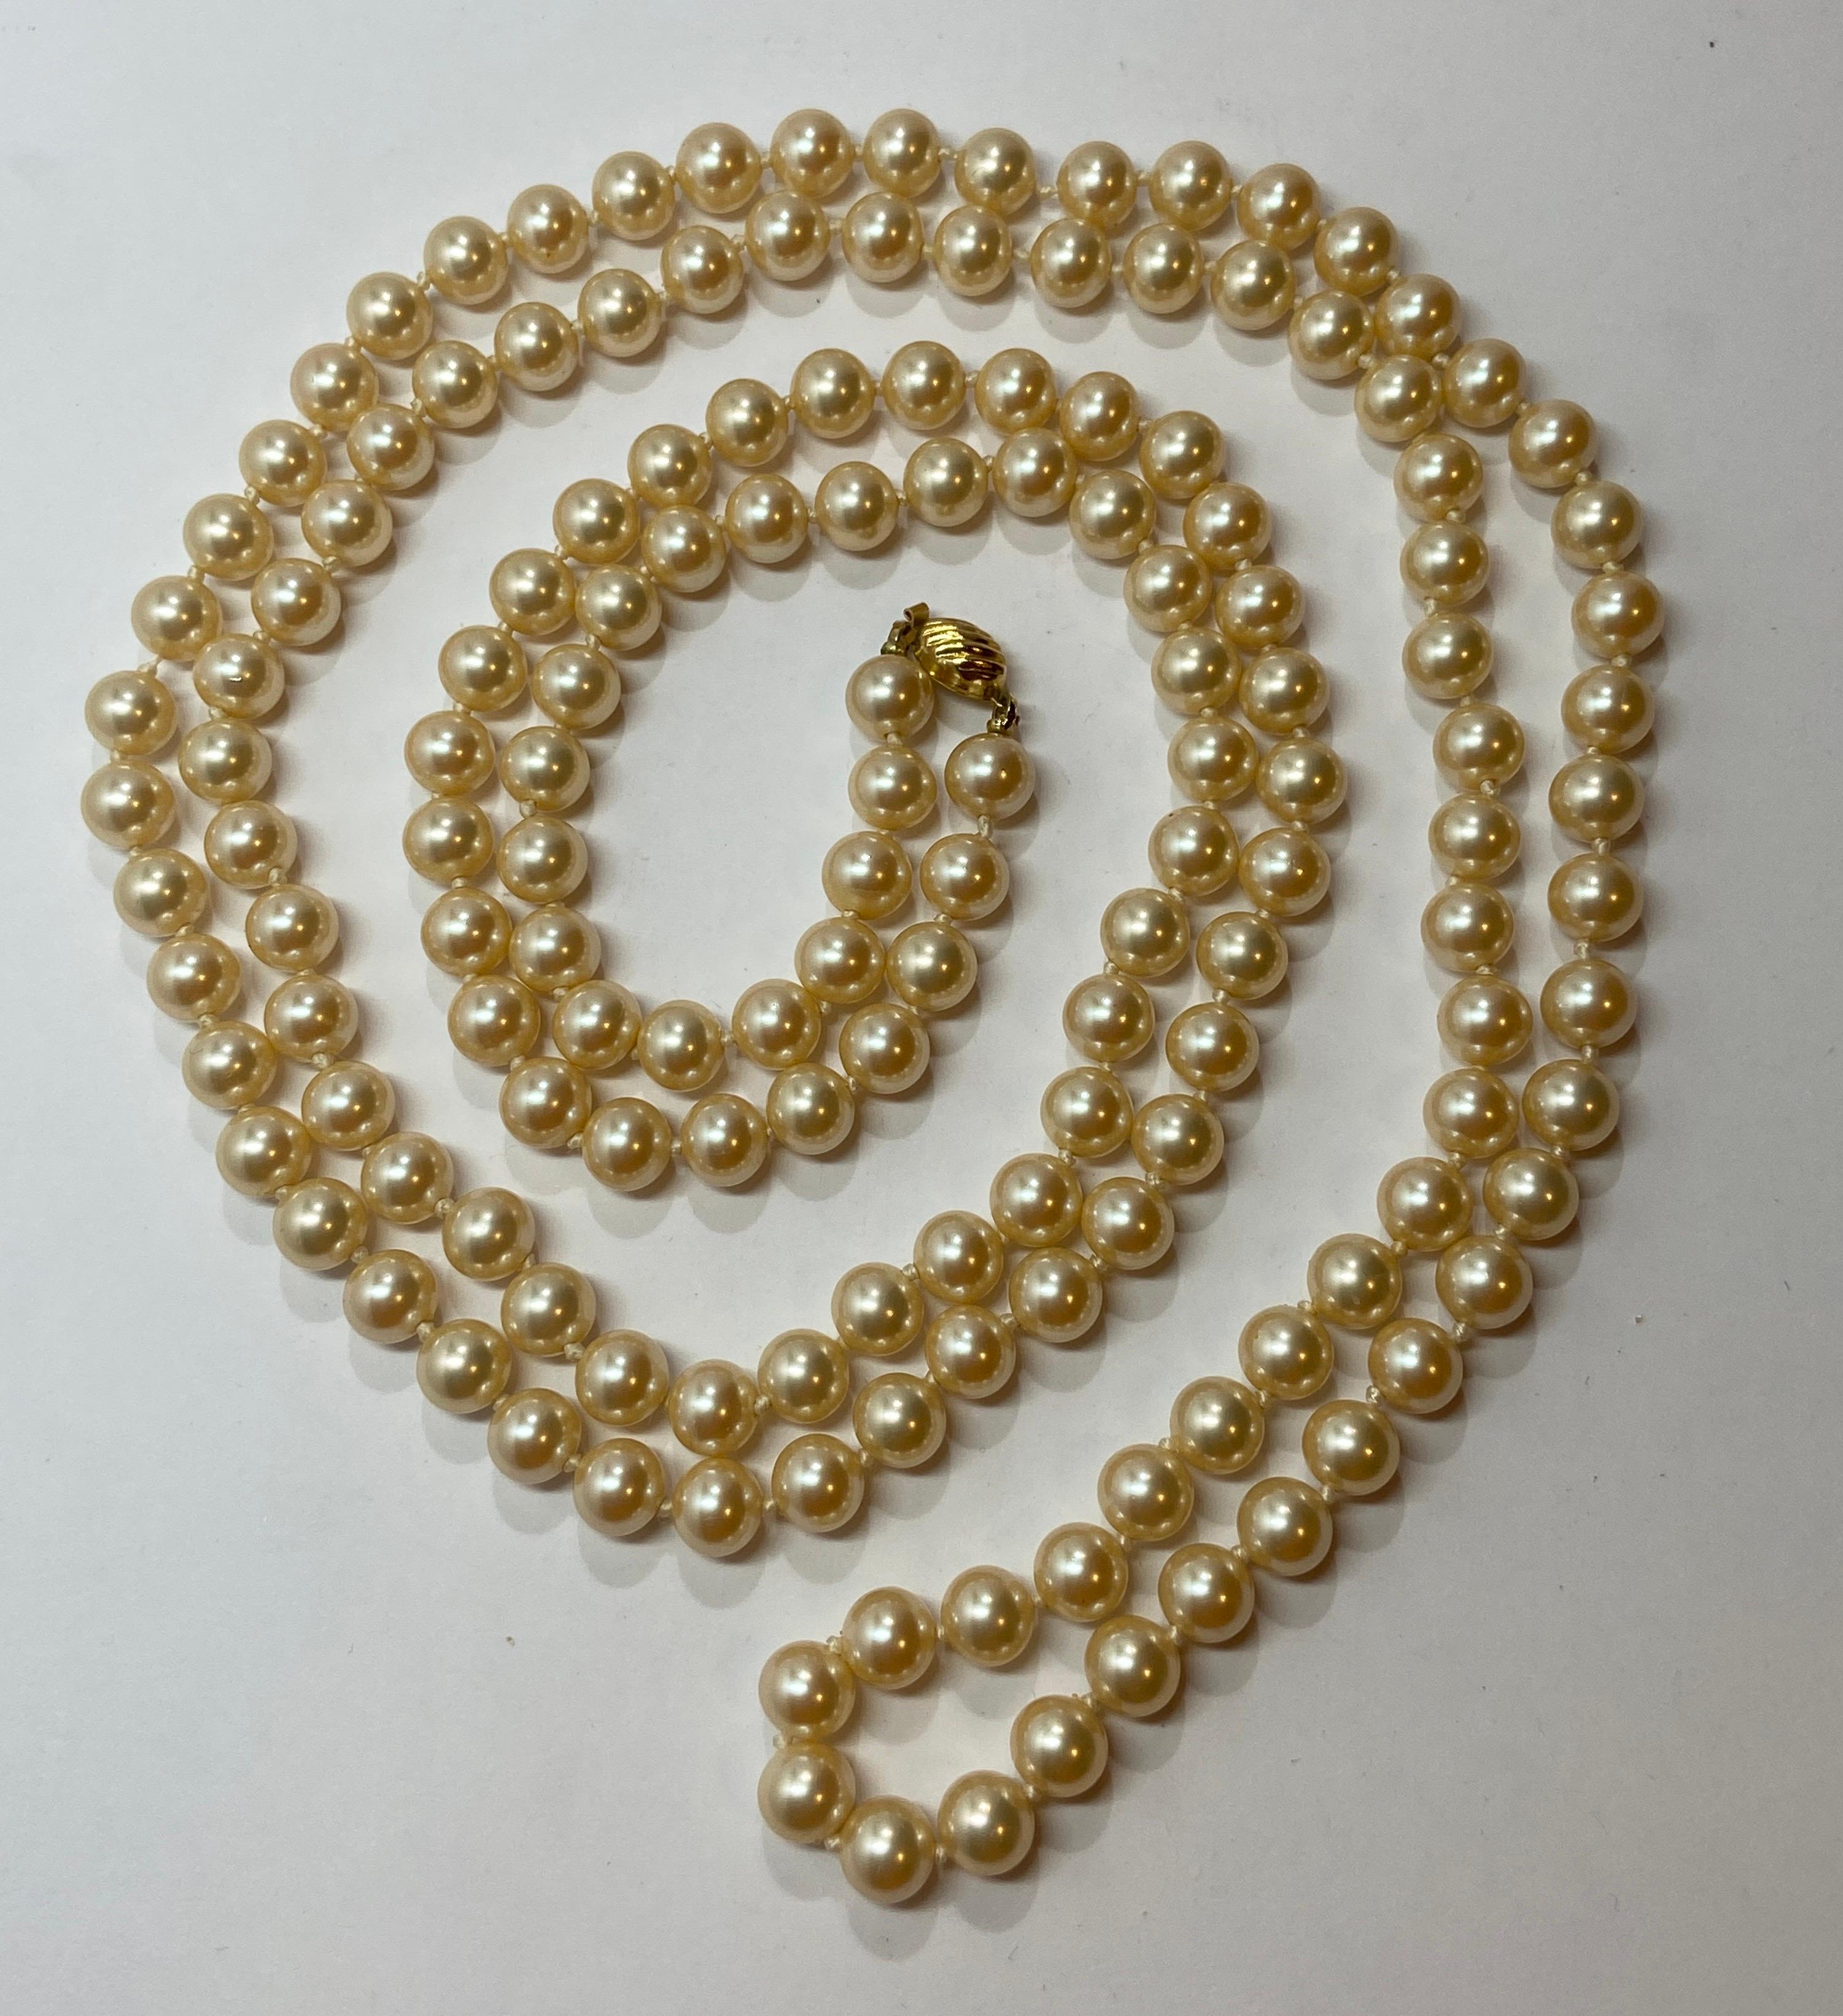 Marvella wonderfully elegant hand-knotted pearl with polished gold hardware clasp closing measures 54 inches in total length. The circumference of the pearls measures 3/8 of a inch. Made in U.S.